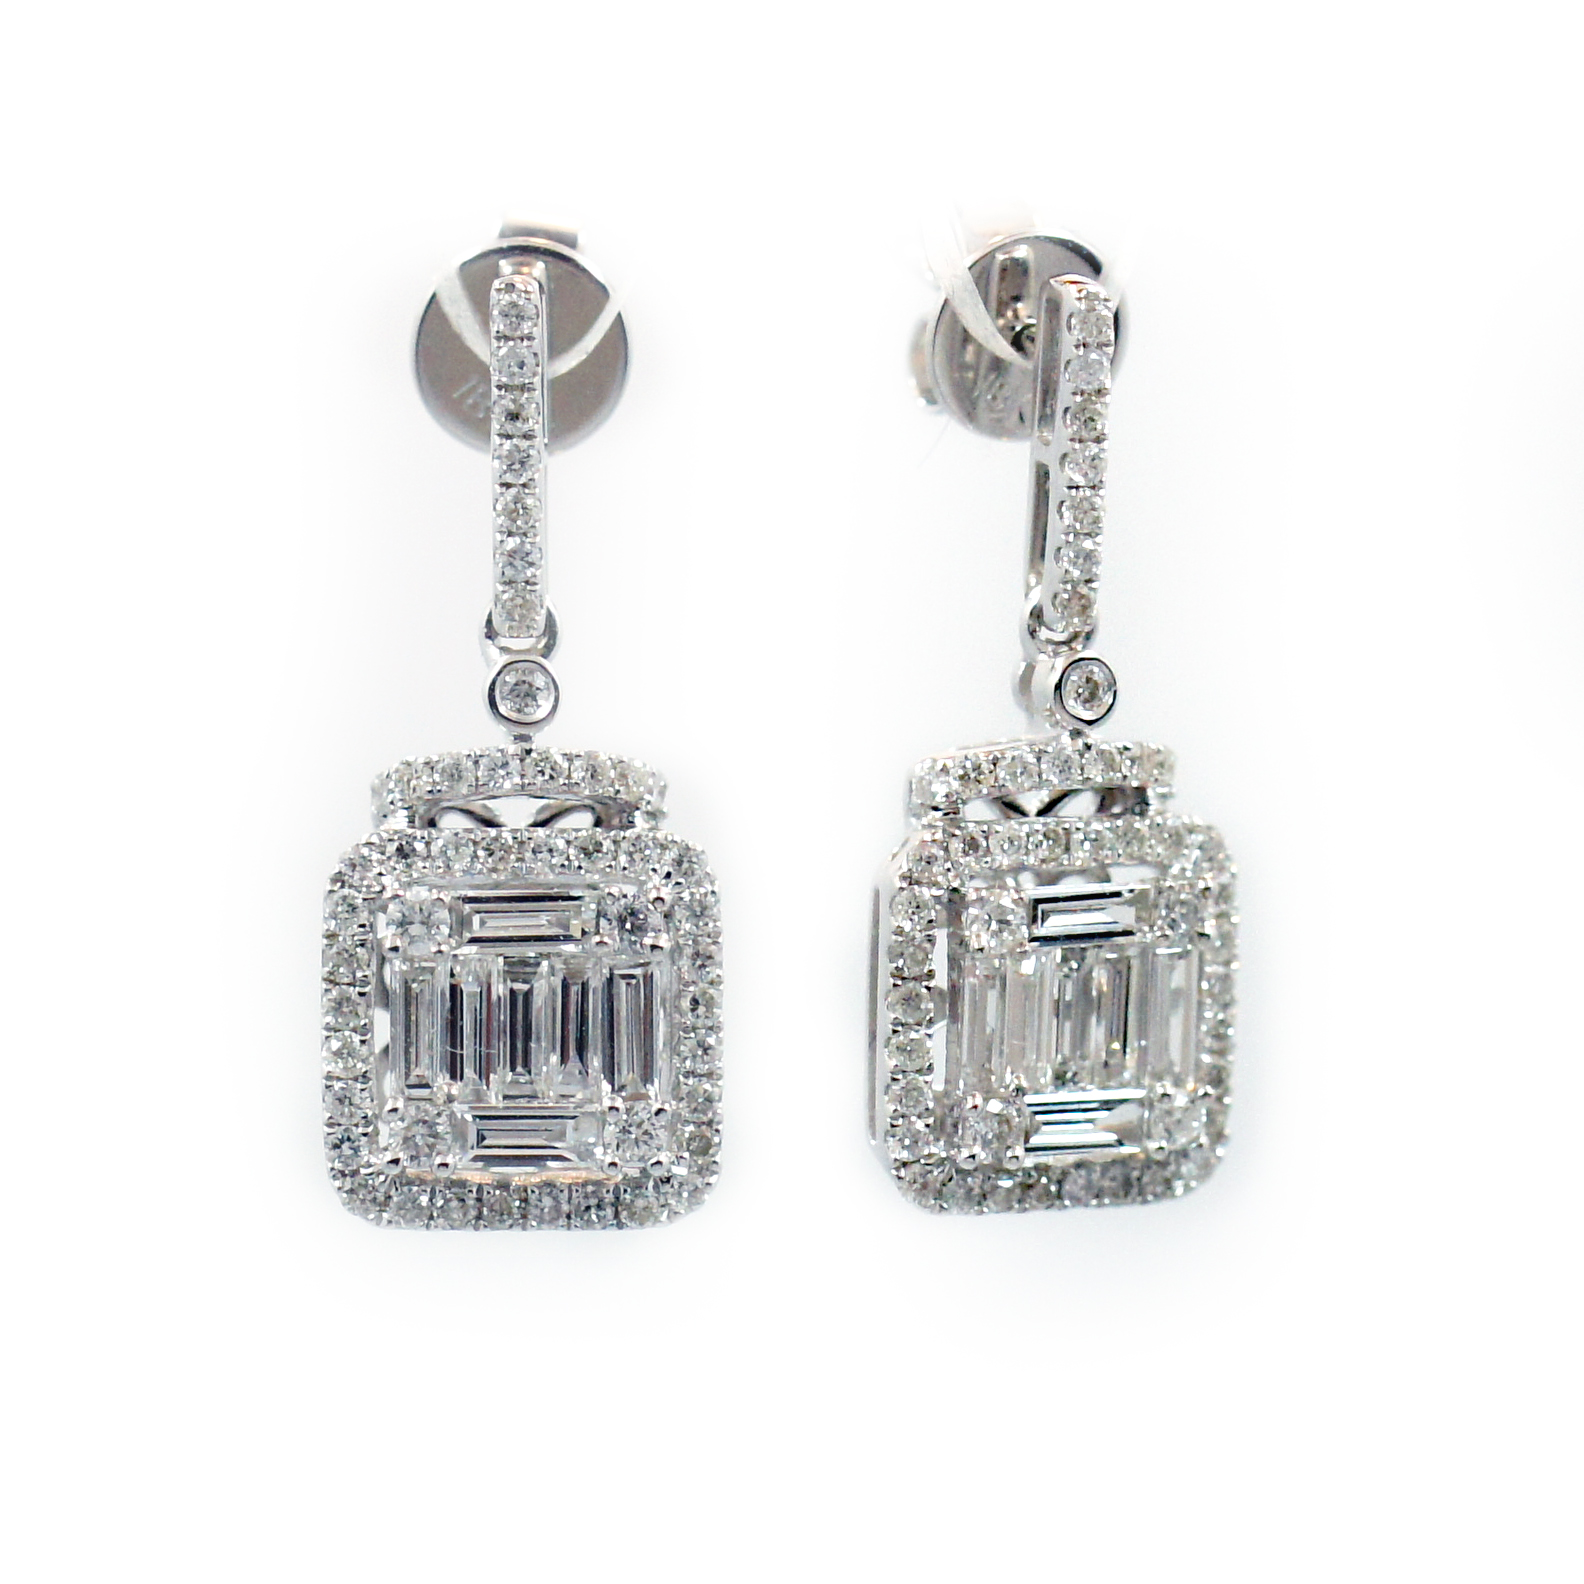 This is a picture of Baguette Diamond Earrings with Halo